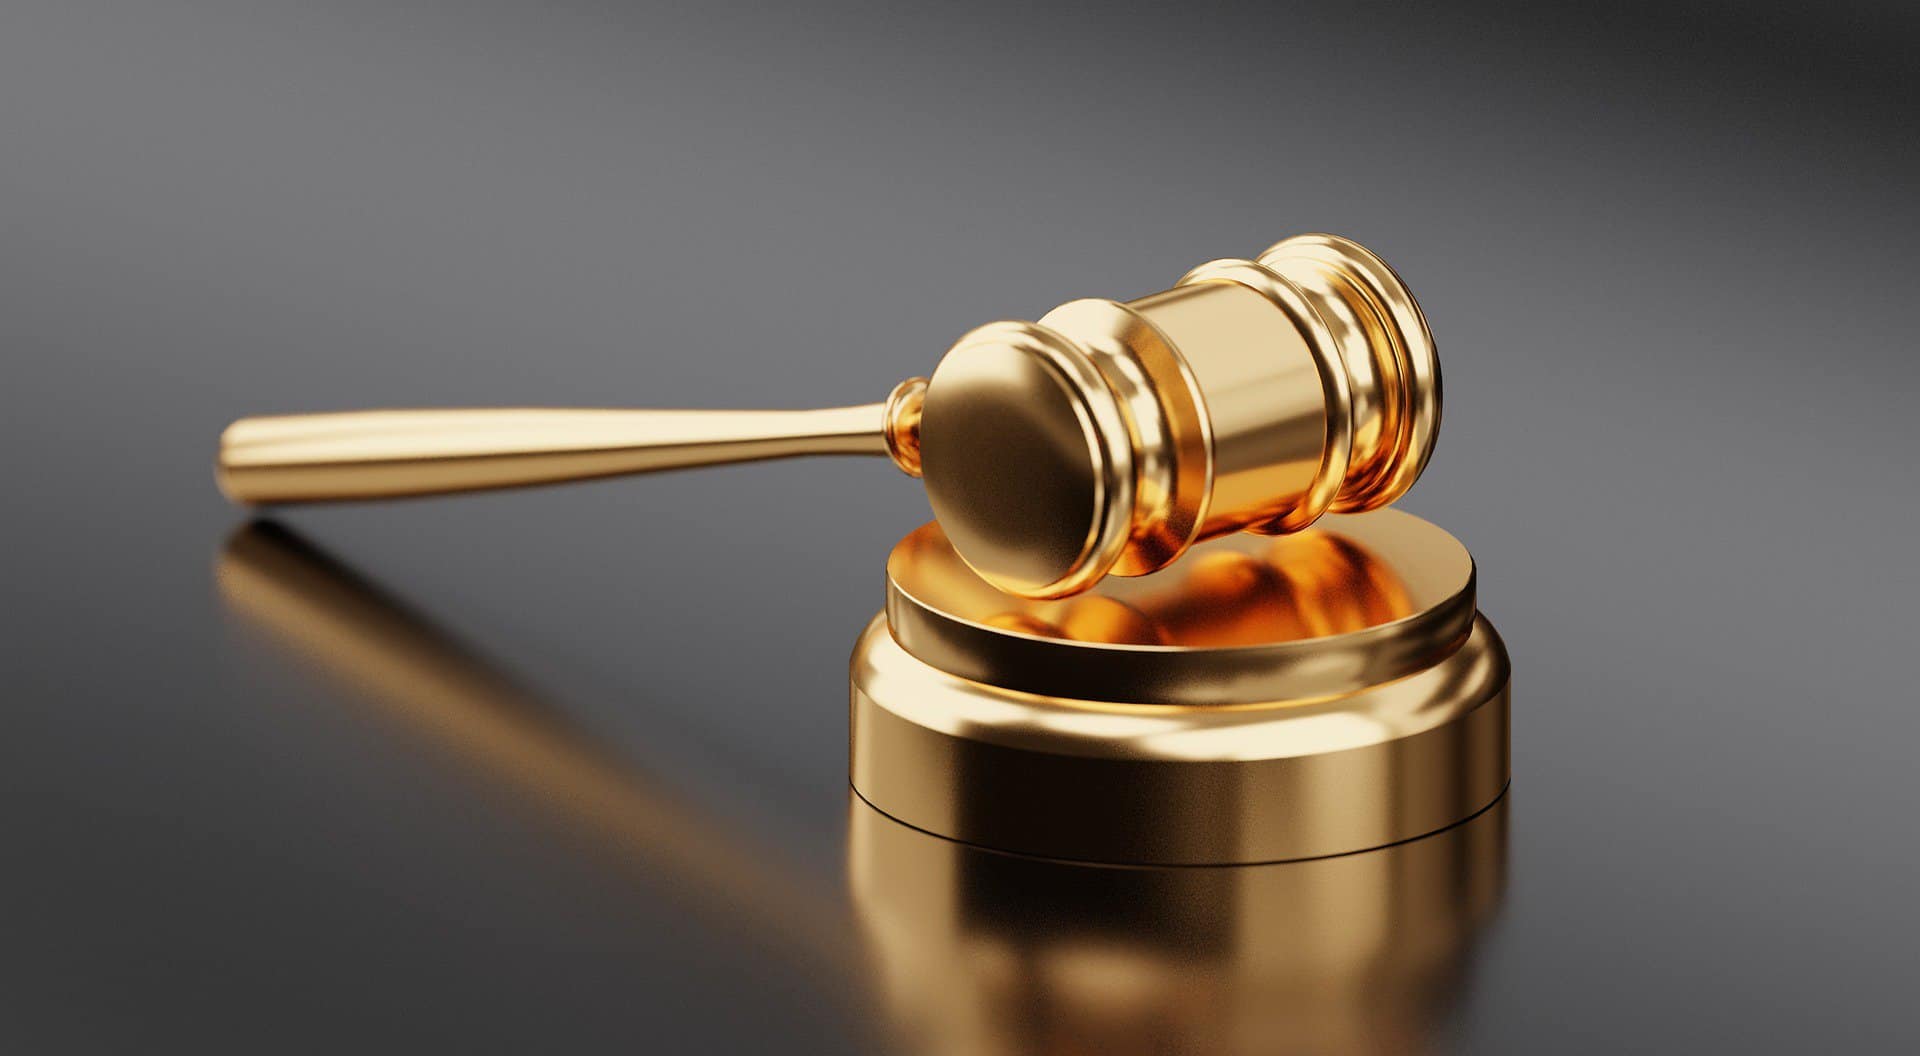 The head of a golden gavel sits on it's base on a dark reflective surface.